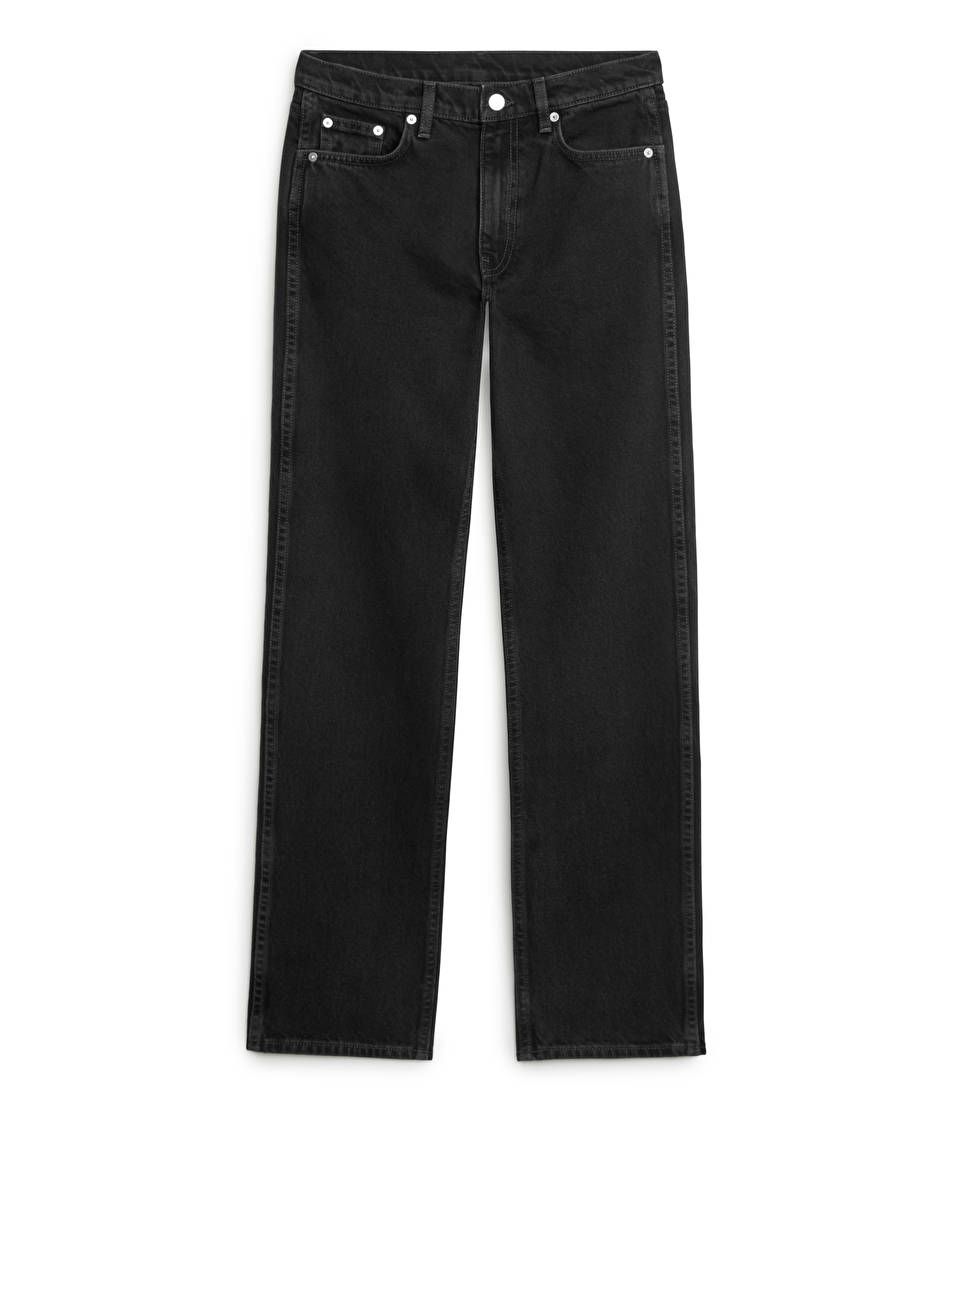 STRAIGHT Non-Stretch Jeans | ARKET (US&UK)